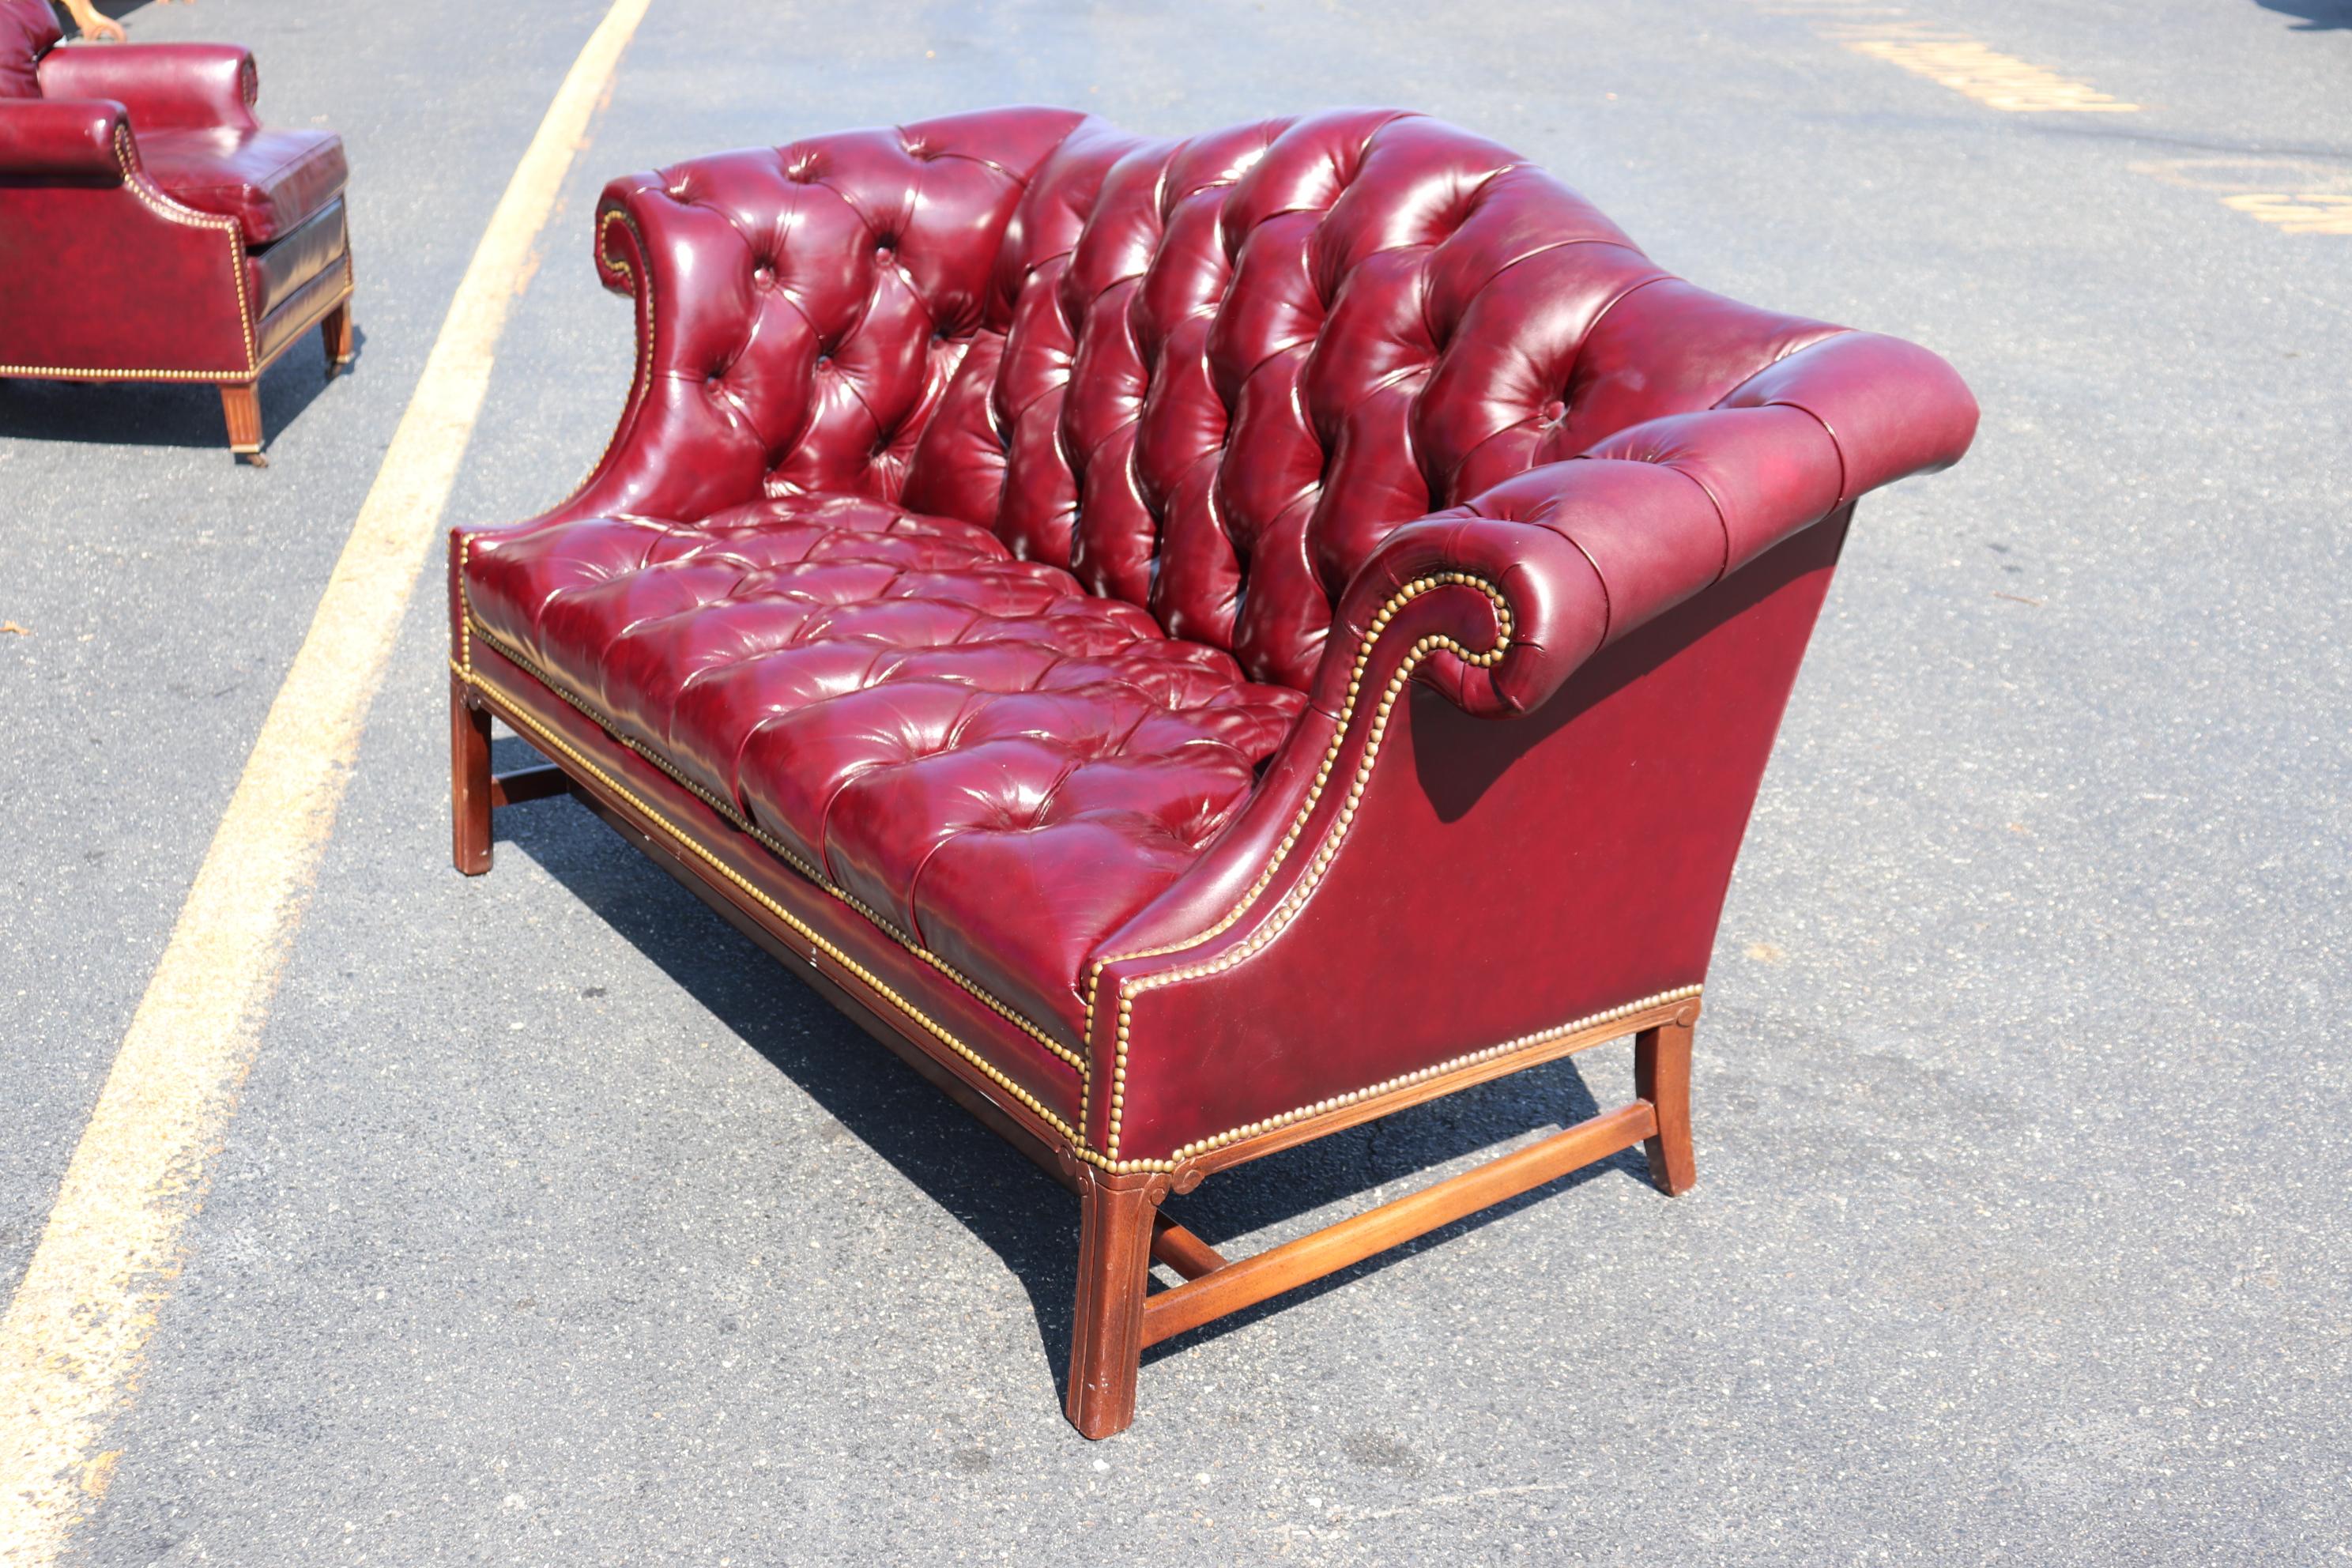 American Leather Hancock & Moore Burgundy Chesterfield Style Camel back Settee Sofa